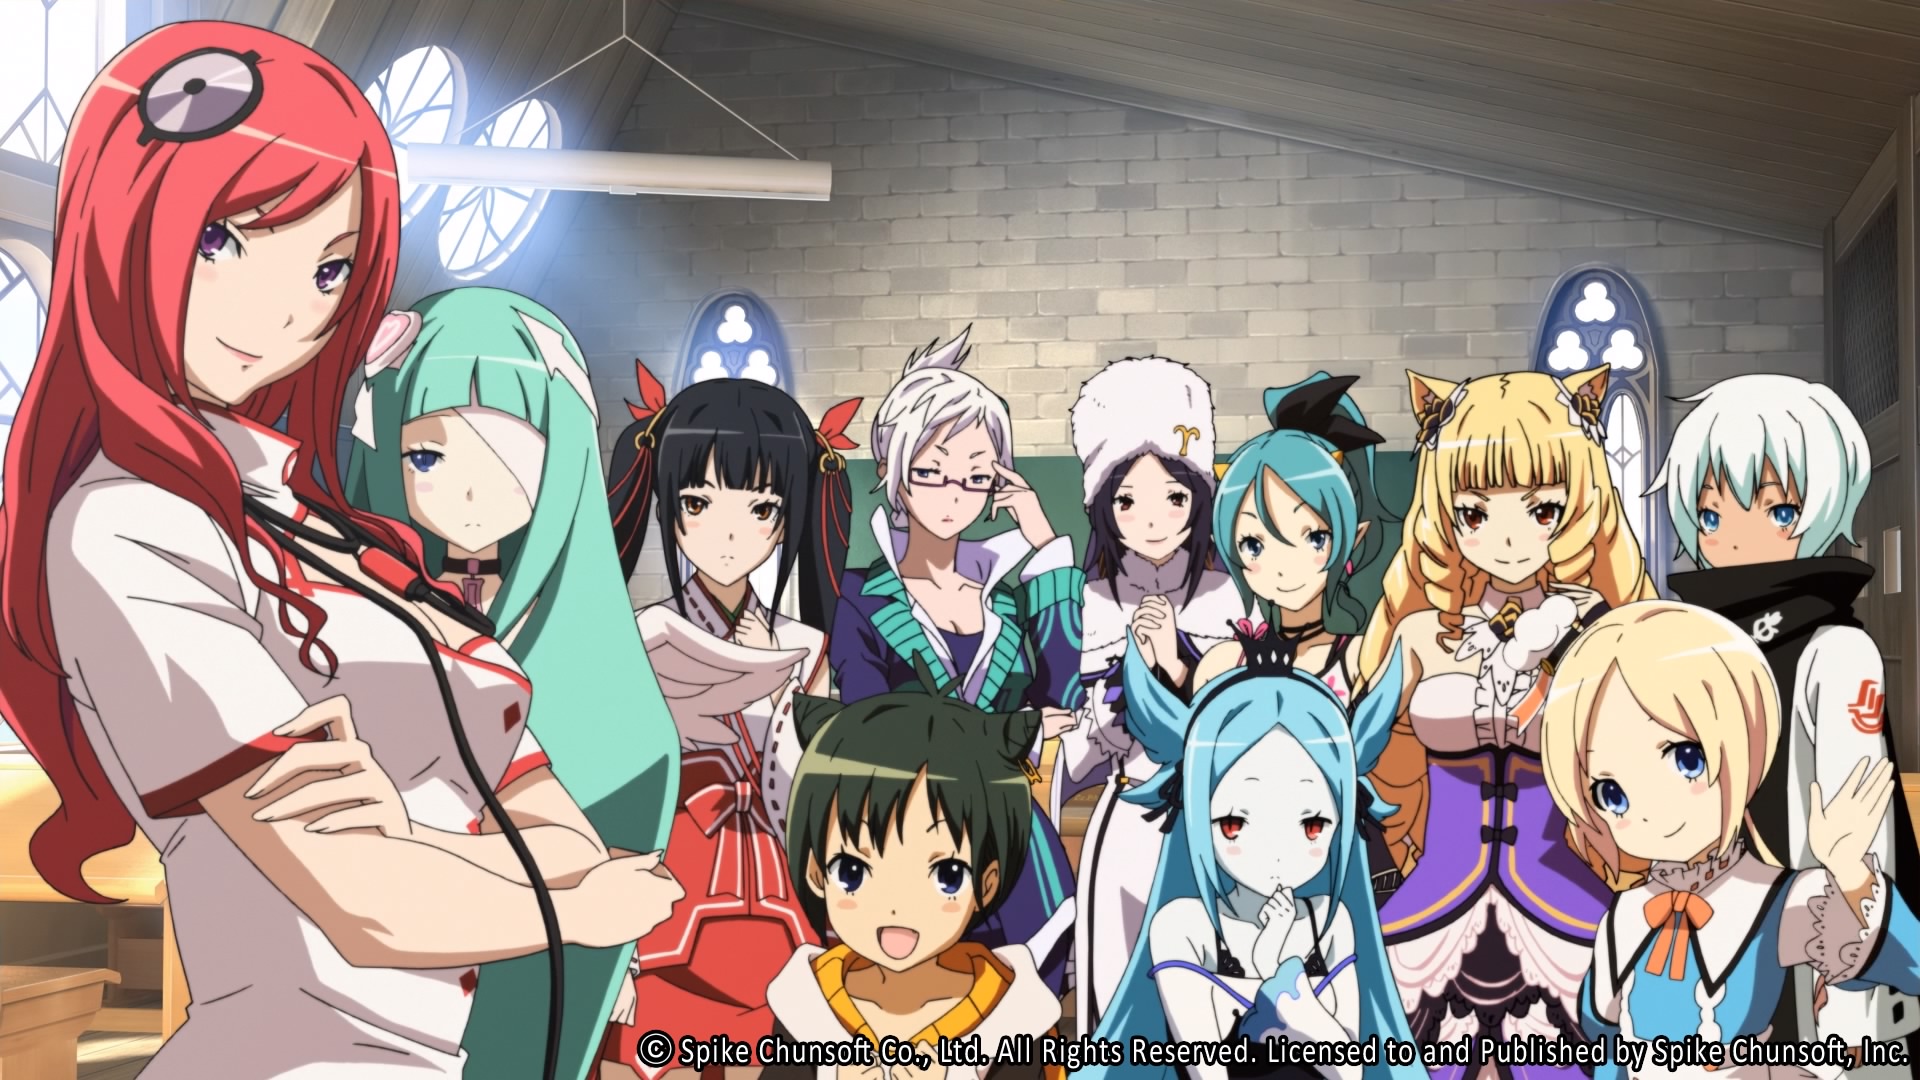 Conception PLUS: Maidens of the Twelve Stars Game's Launch Trailer